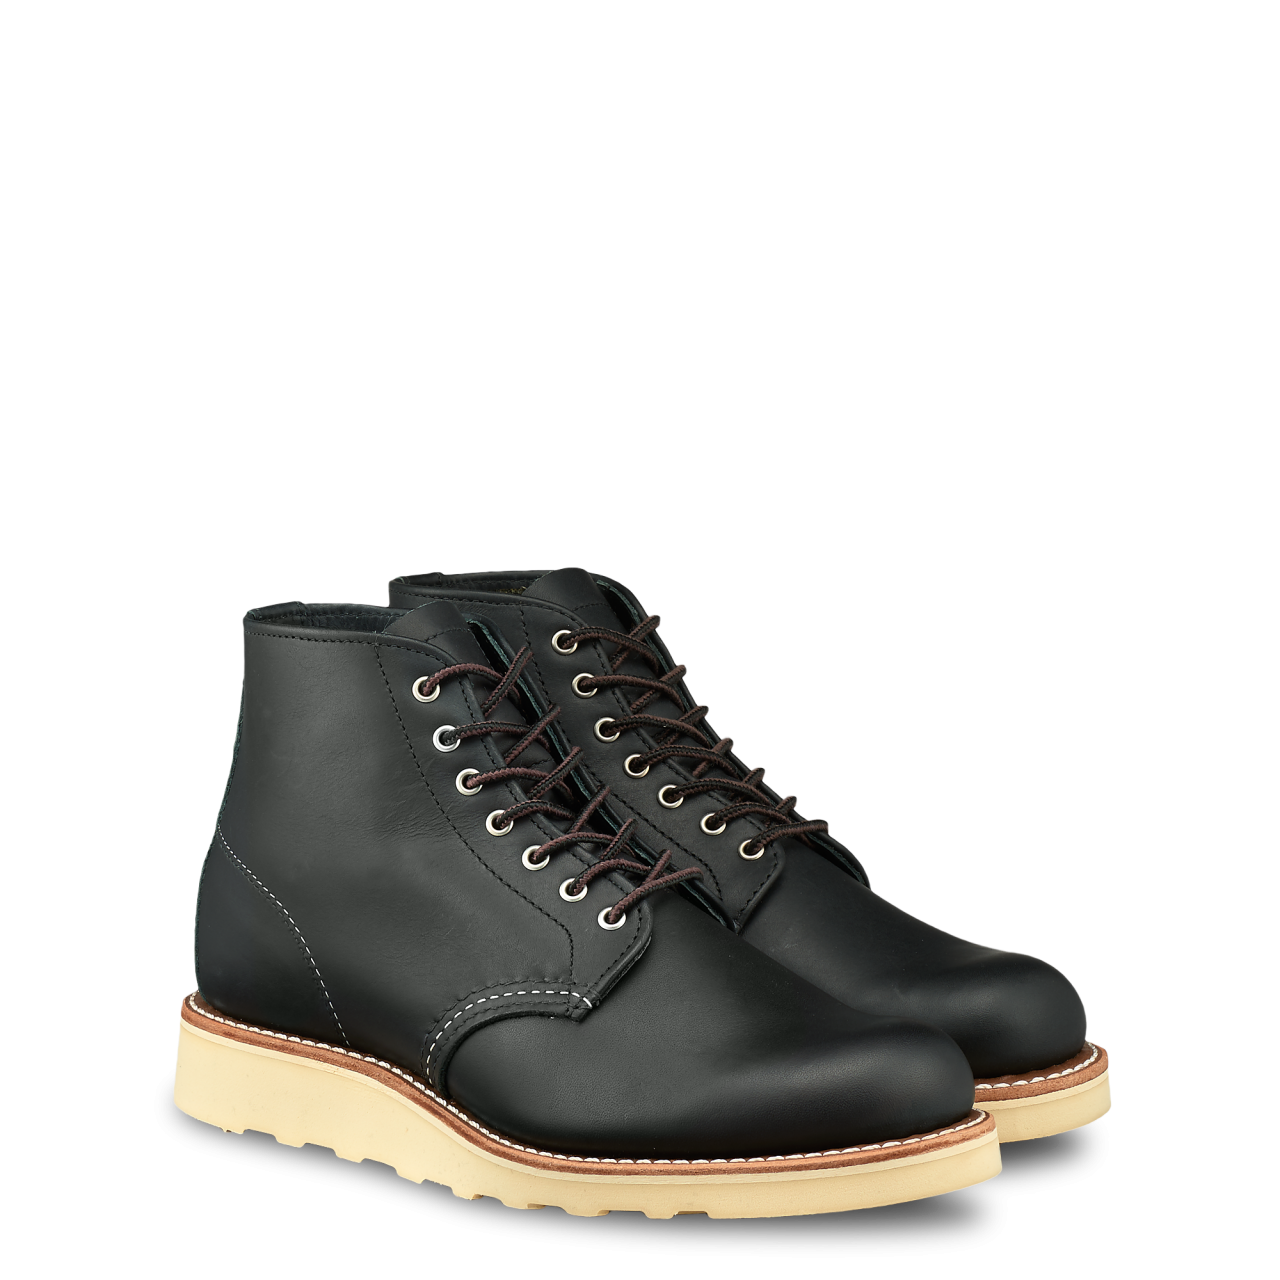 Red Wing 3450 6" Round Toe